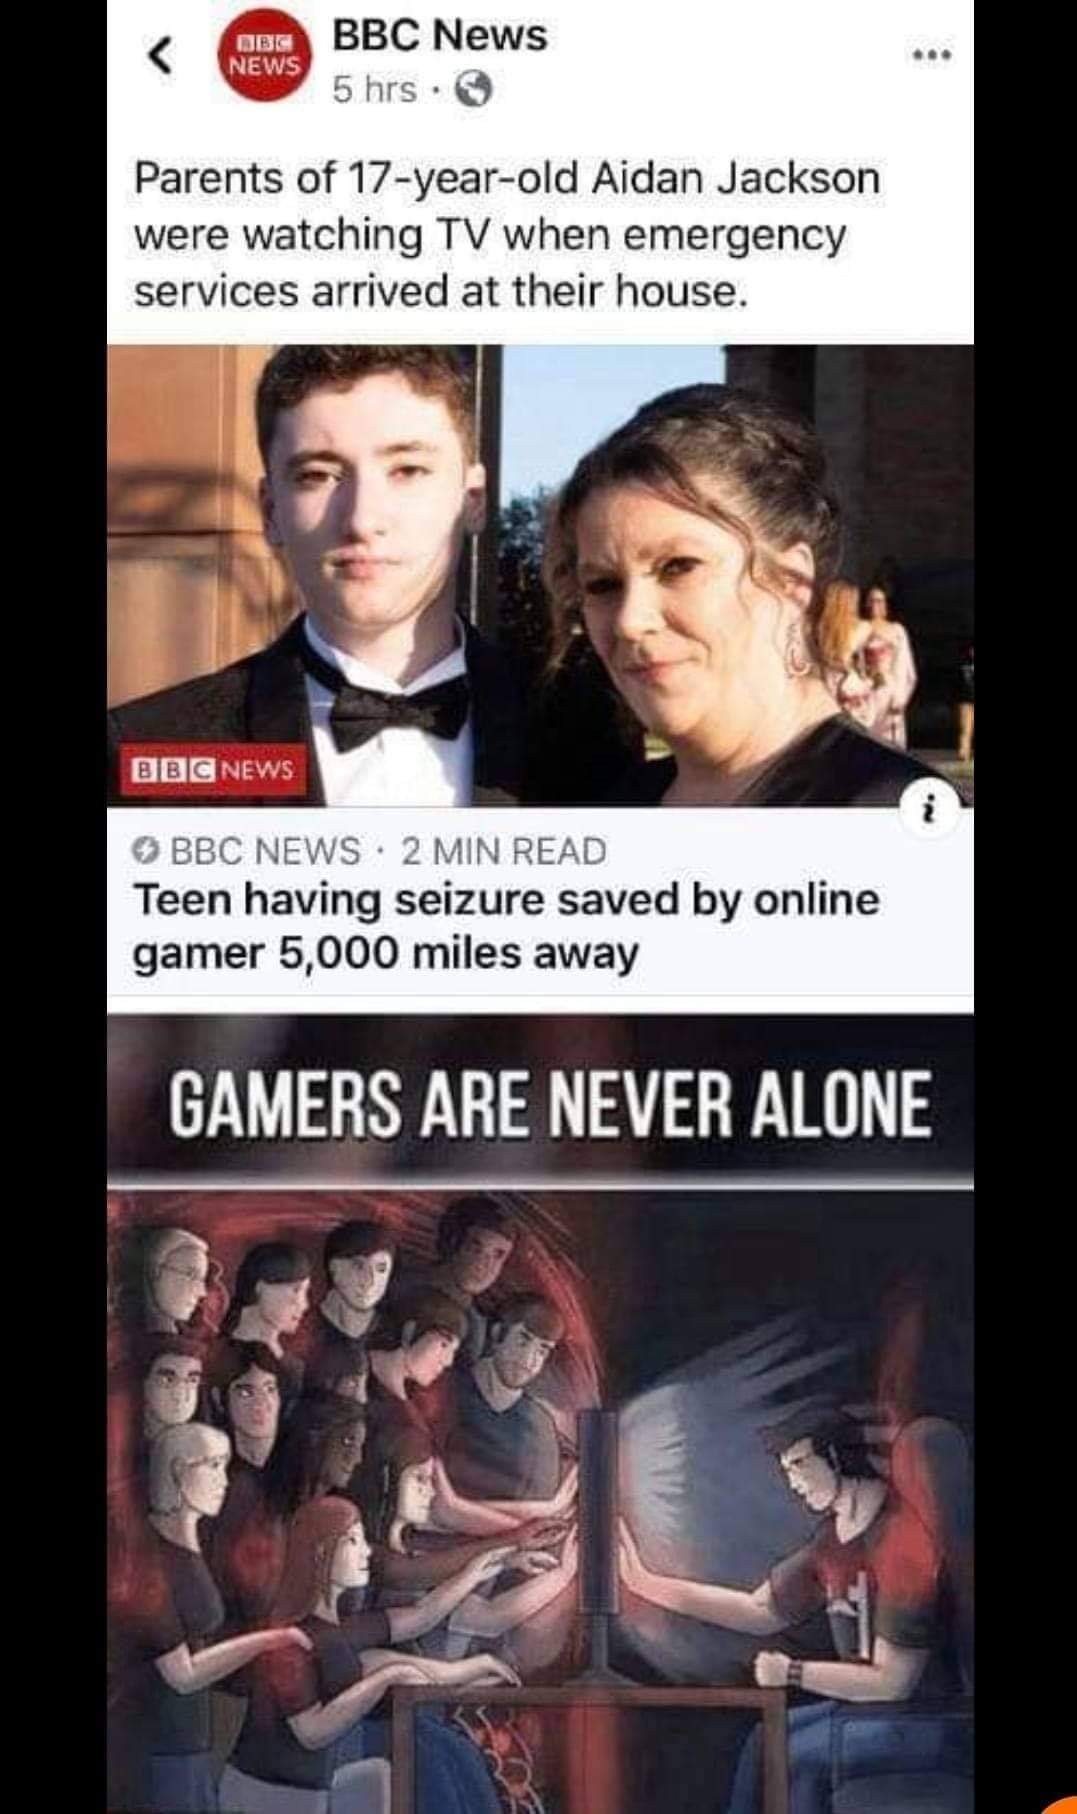 gamers are never alone - Mbo Bbc News News 5 hrs. Parents of 17yearold Aidan Jackson were watching Tv when emergency services arrived at their house. Bbc News Bbc News 2 Min Read Teen having seizure saved by online gamer 5,000 miles away Gamers Are Never 